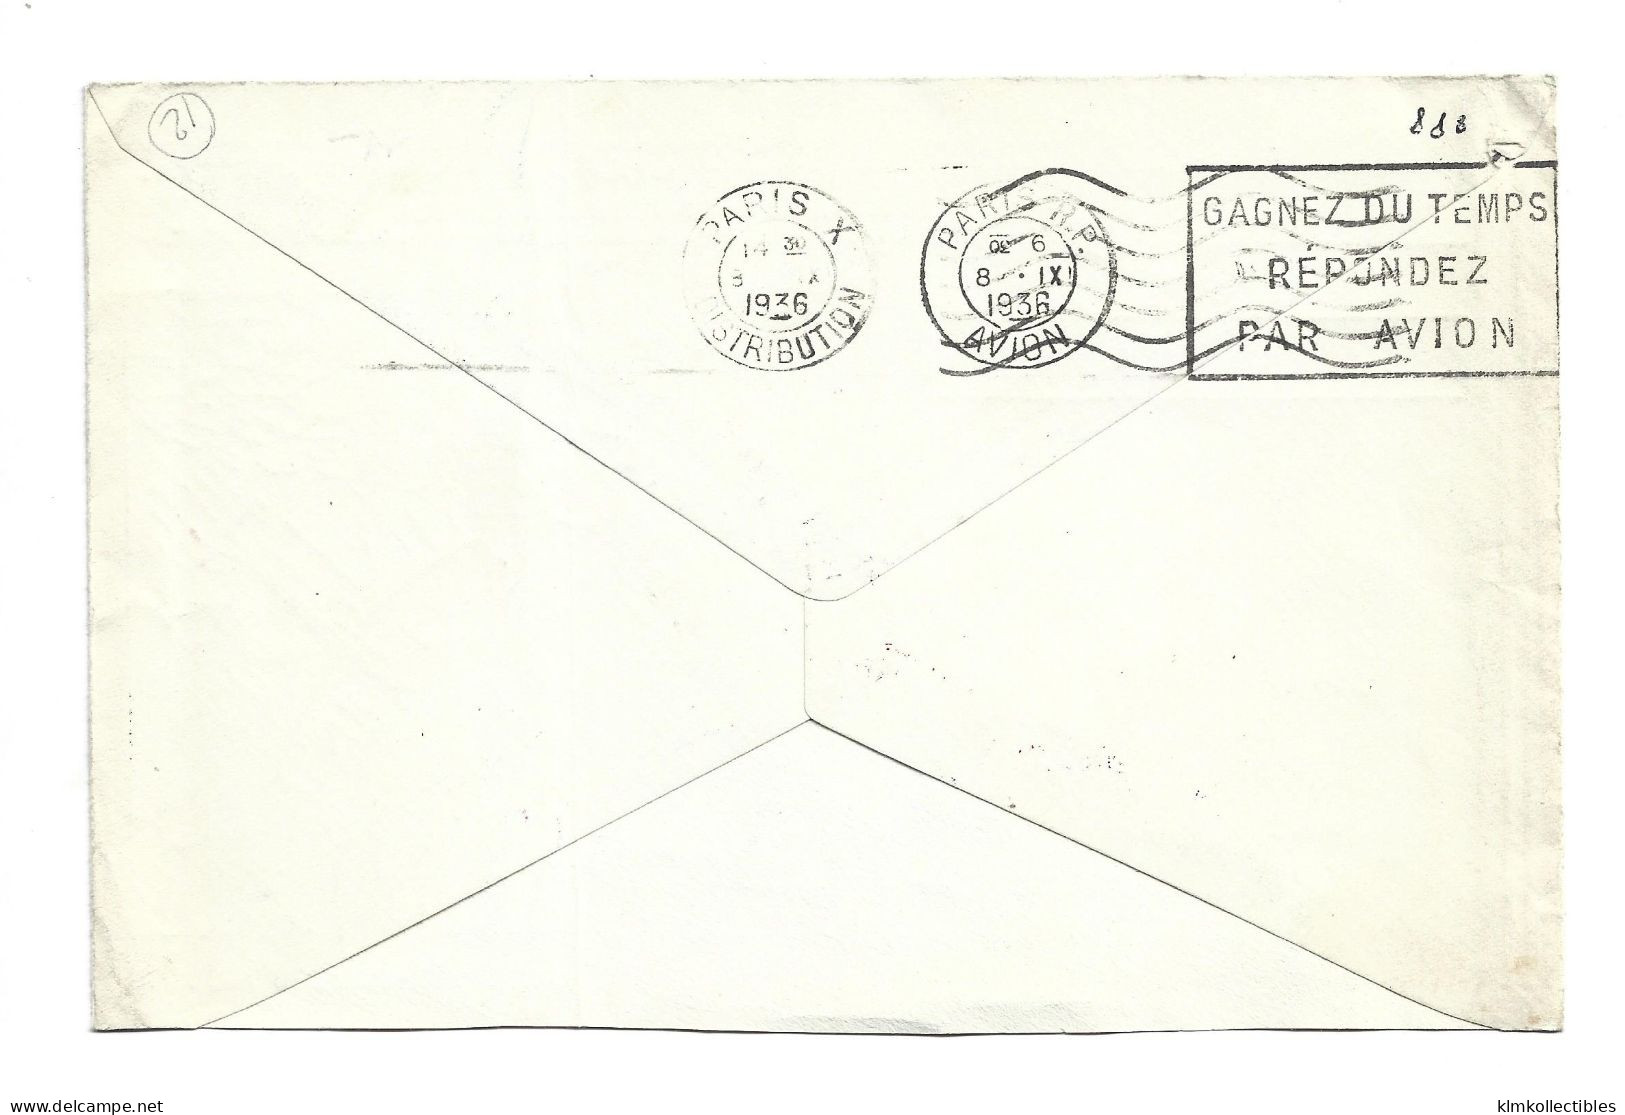 DENMARK DANMARK - AIRMAIL LUFTPOST COVER TO FRANCE - 1936 NEPA SPECIAL CANCEL FIRST 1ST FLIGHT - Poste Aérienne